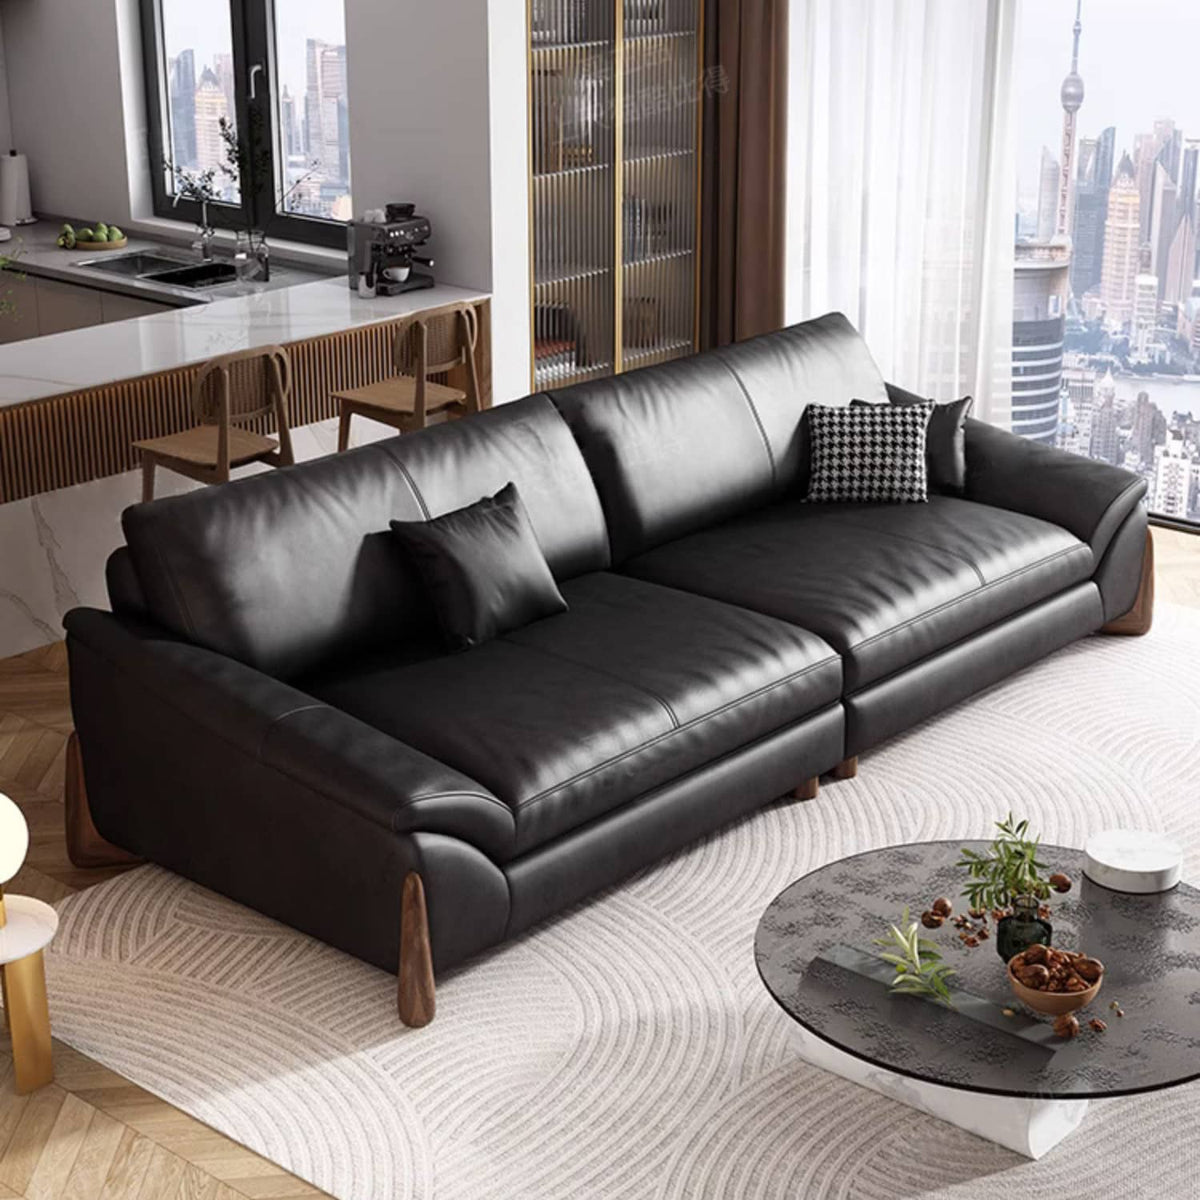 Stylish Black Pine Wood Sofa with Comfortable Goose Down and Faux Leather Finish hzh-1368